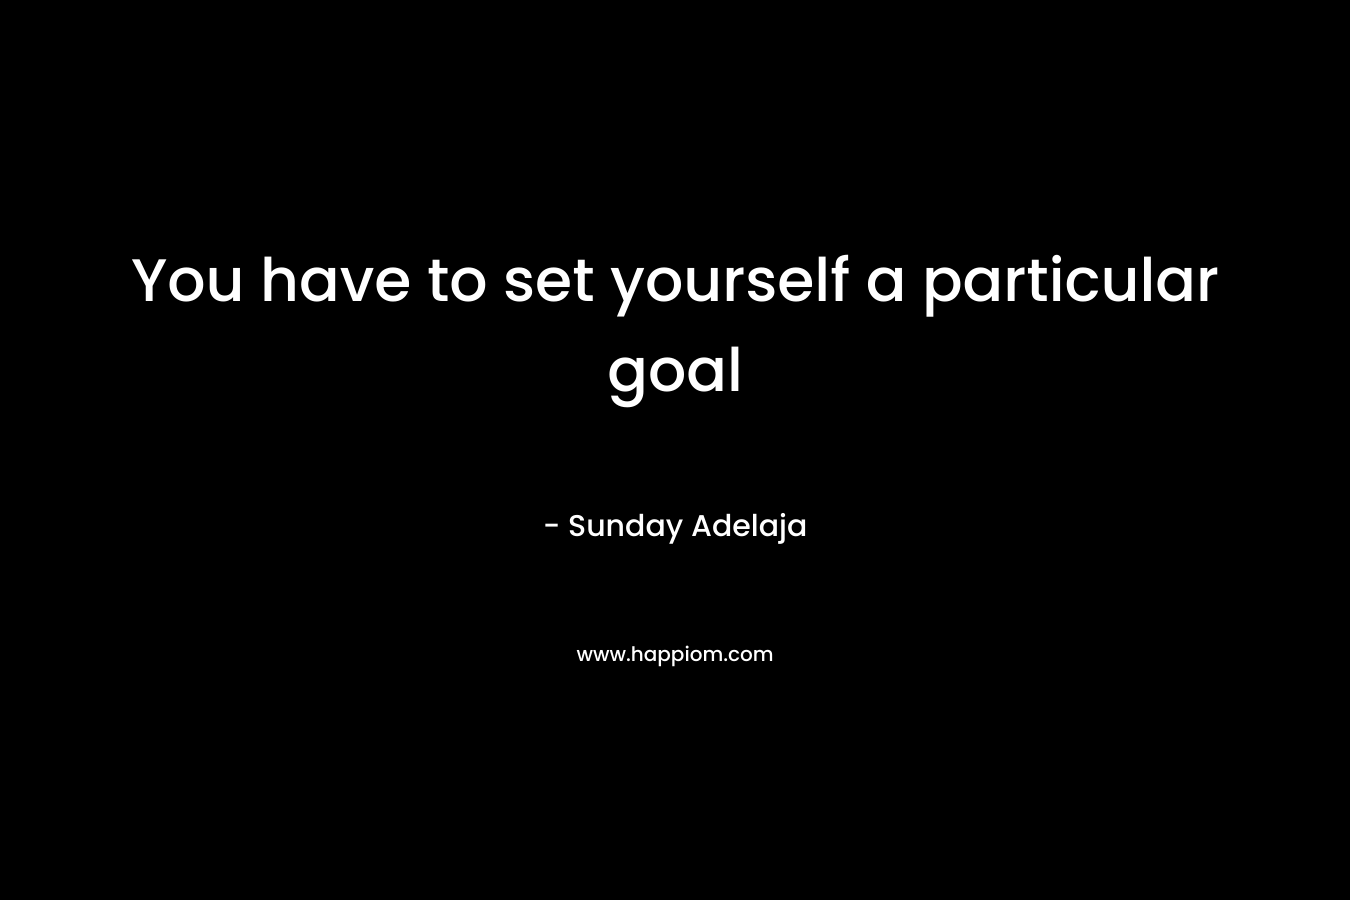 You have to set yourself a particular goal